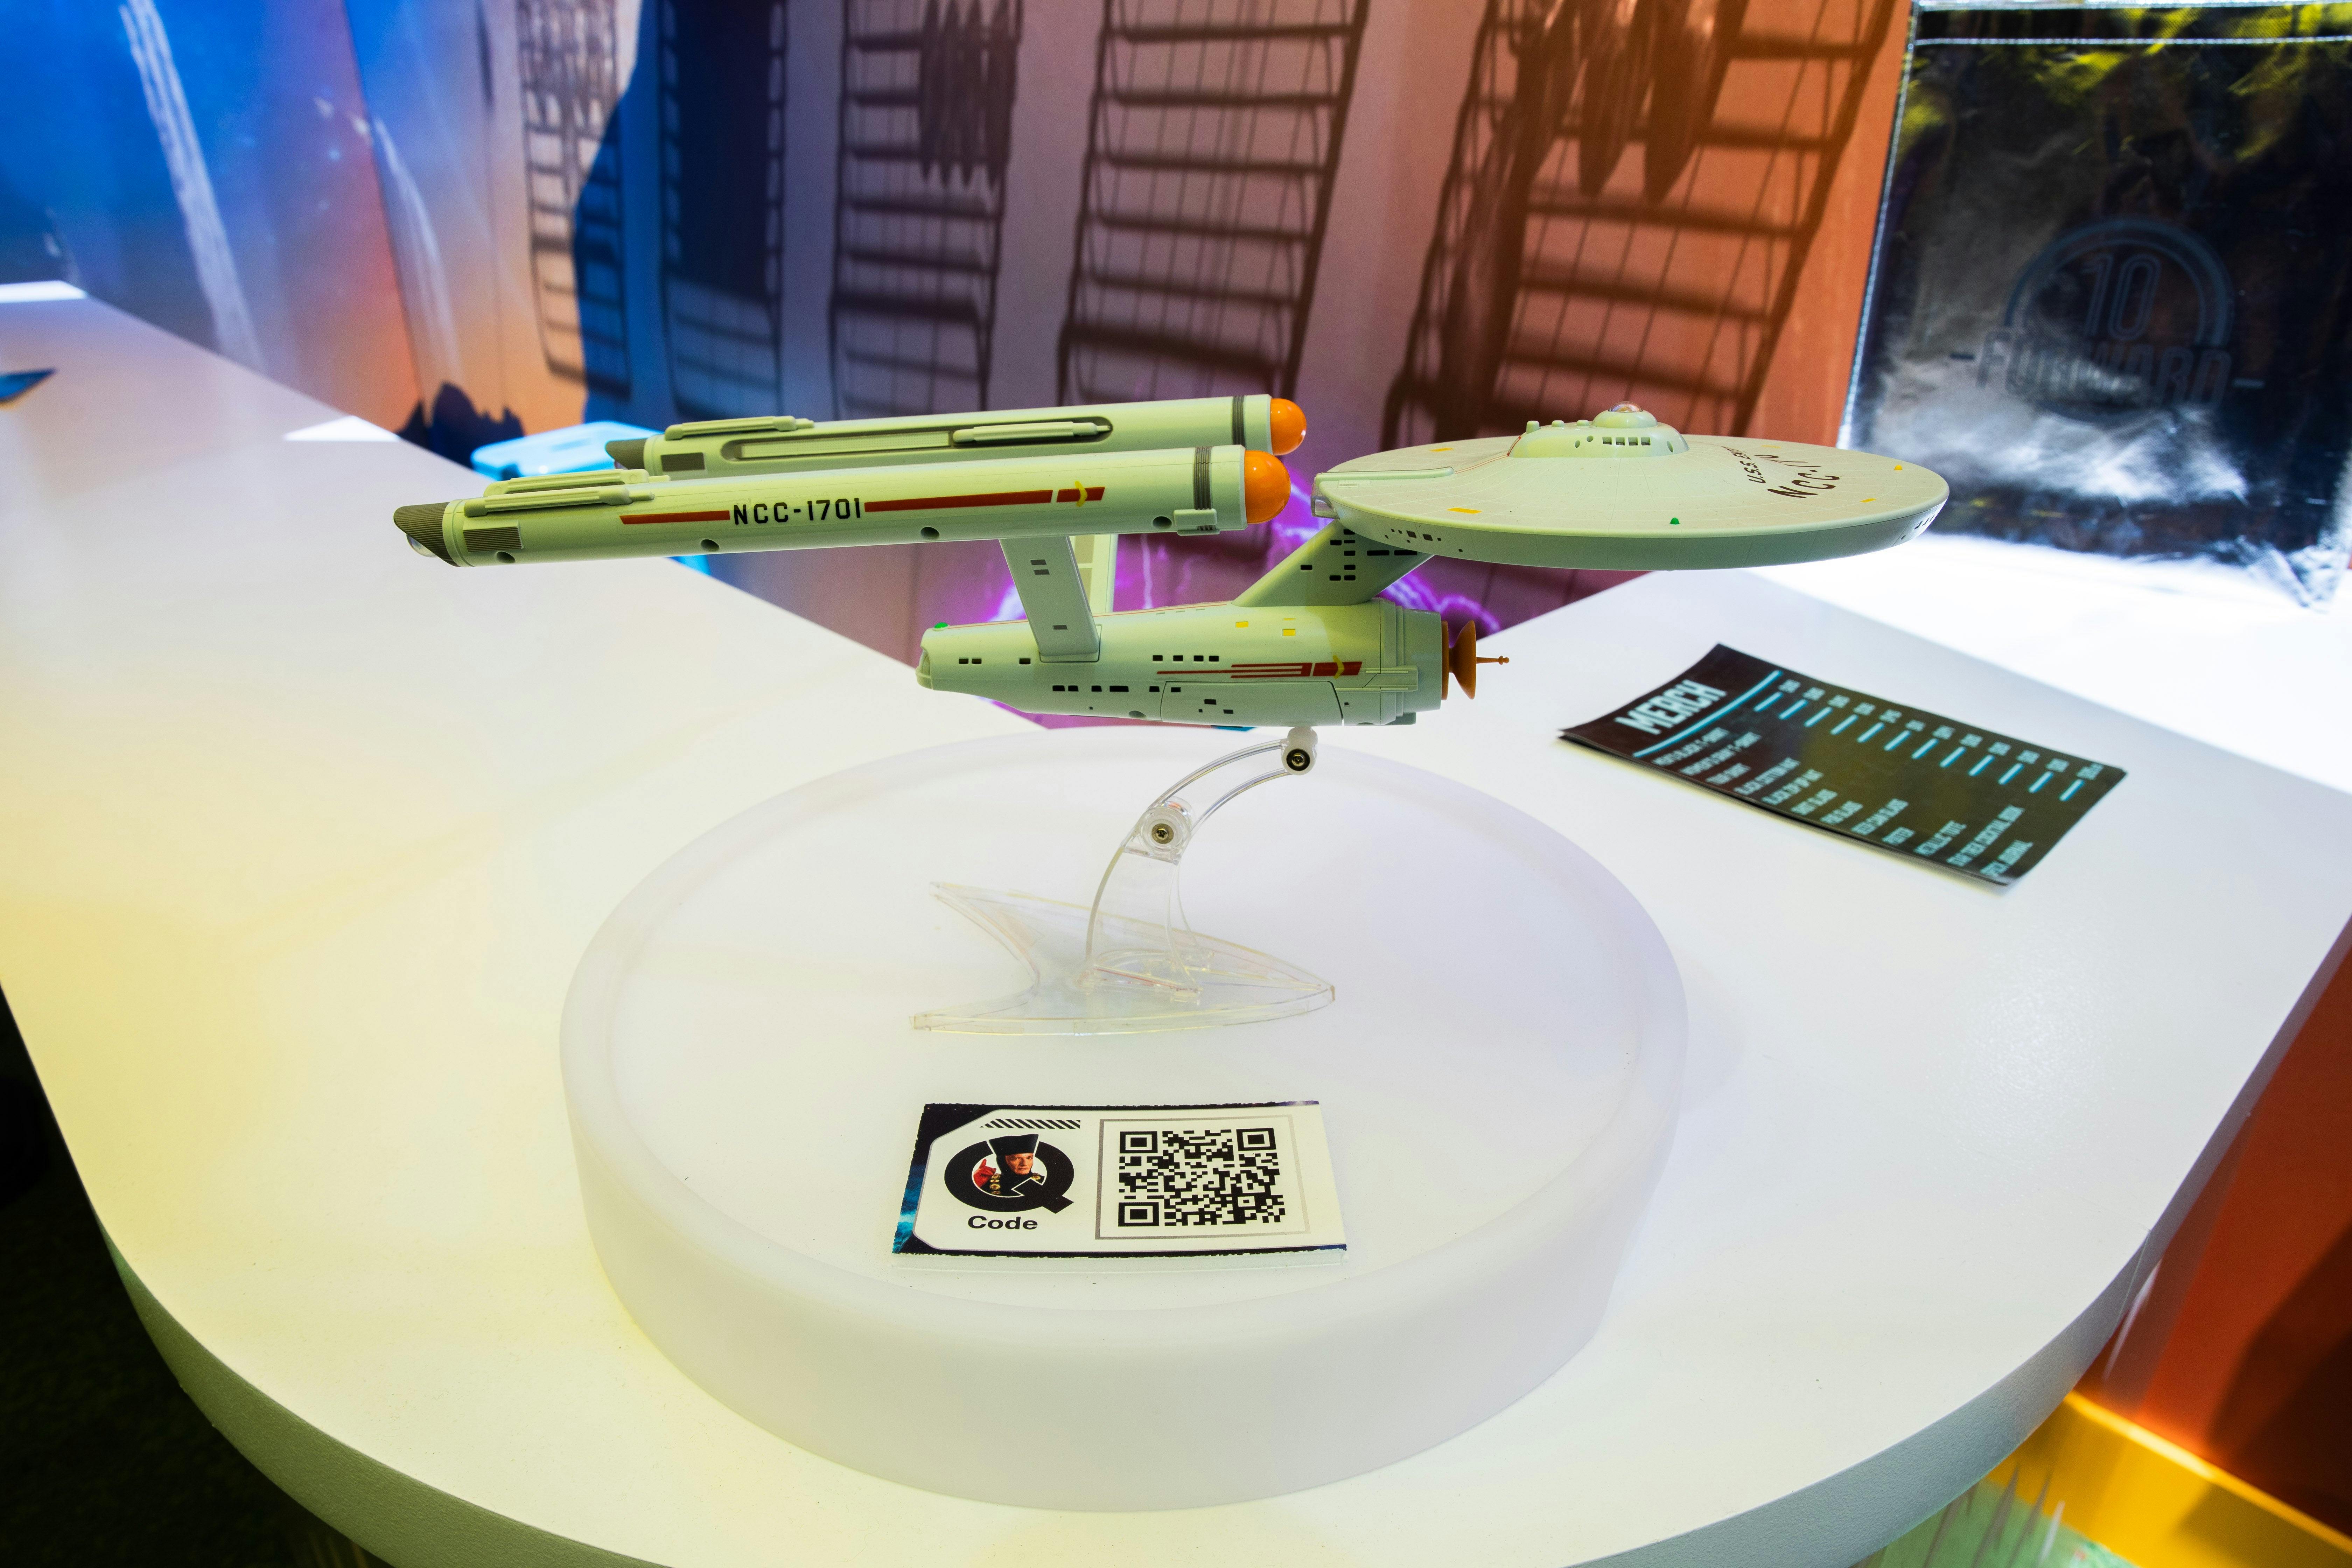 A model of the U.S.S. Enterprise from TOS.